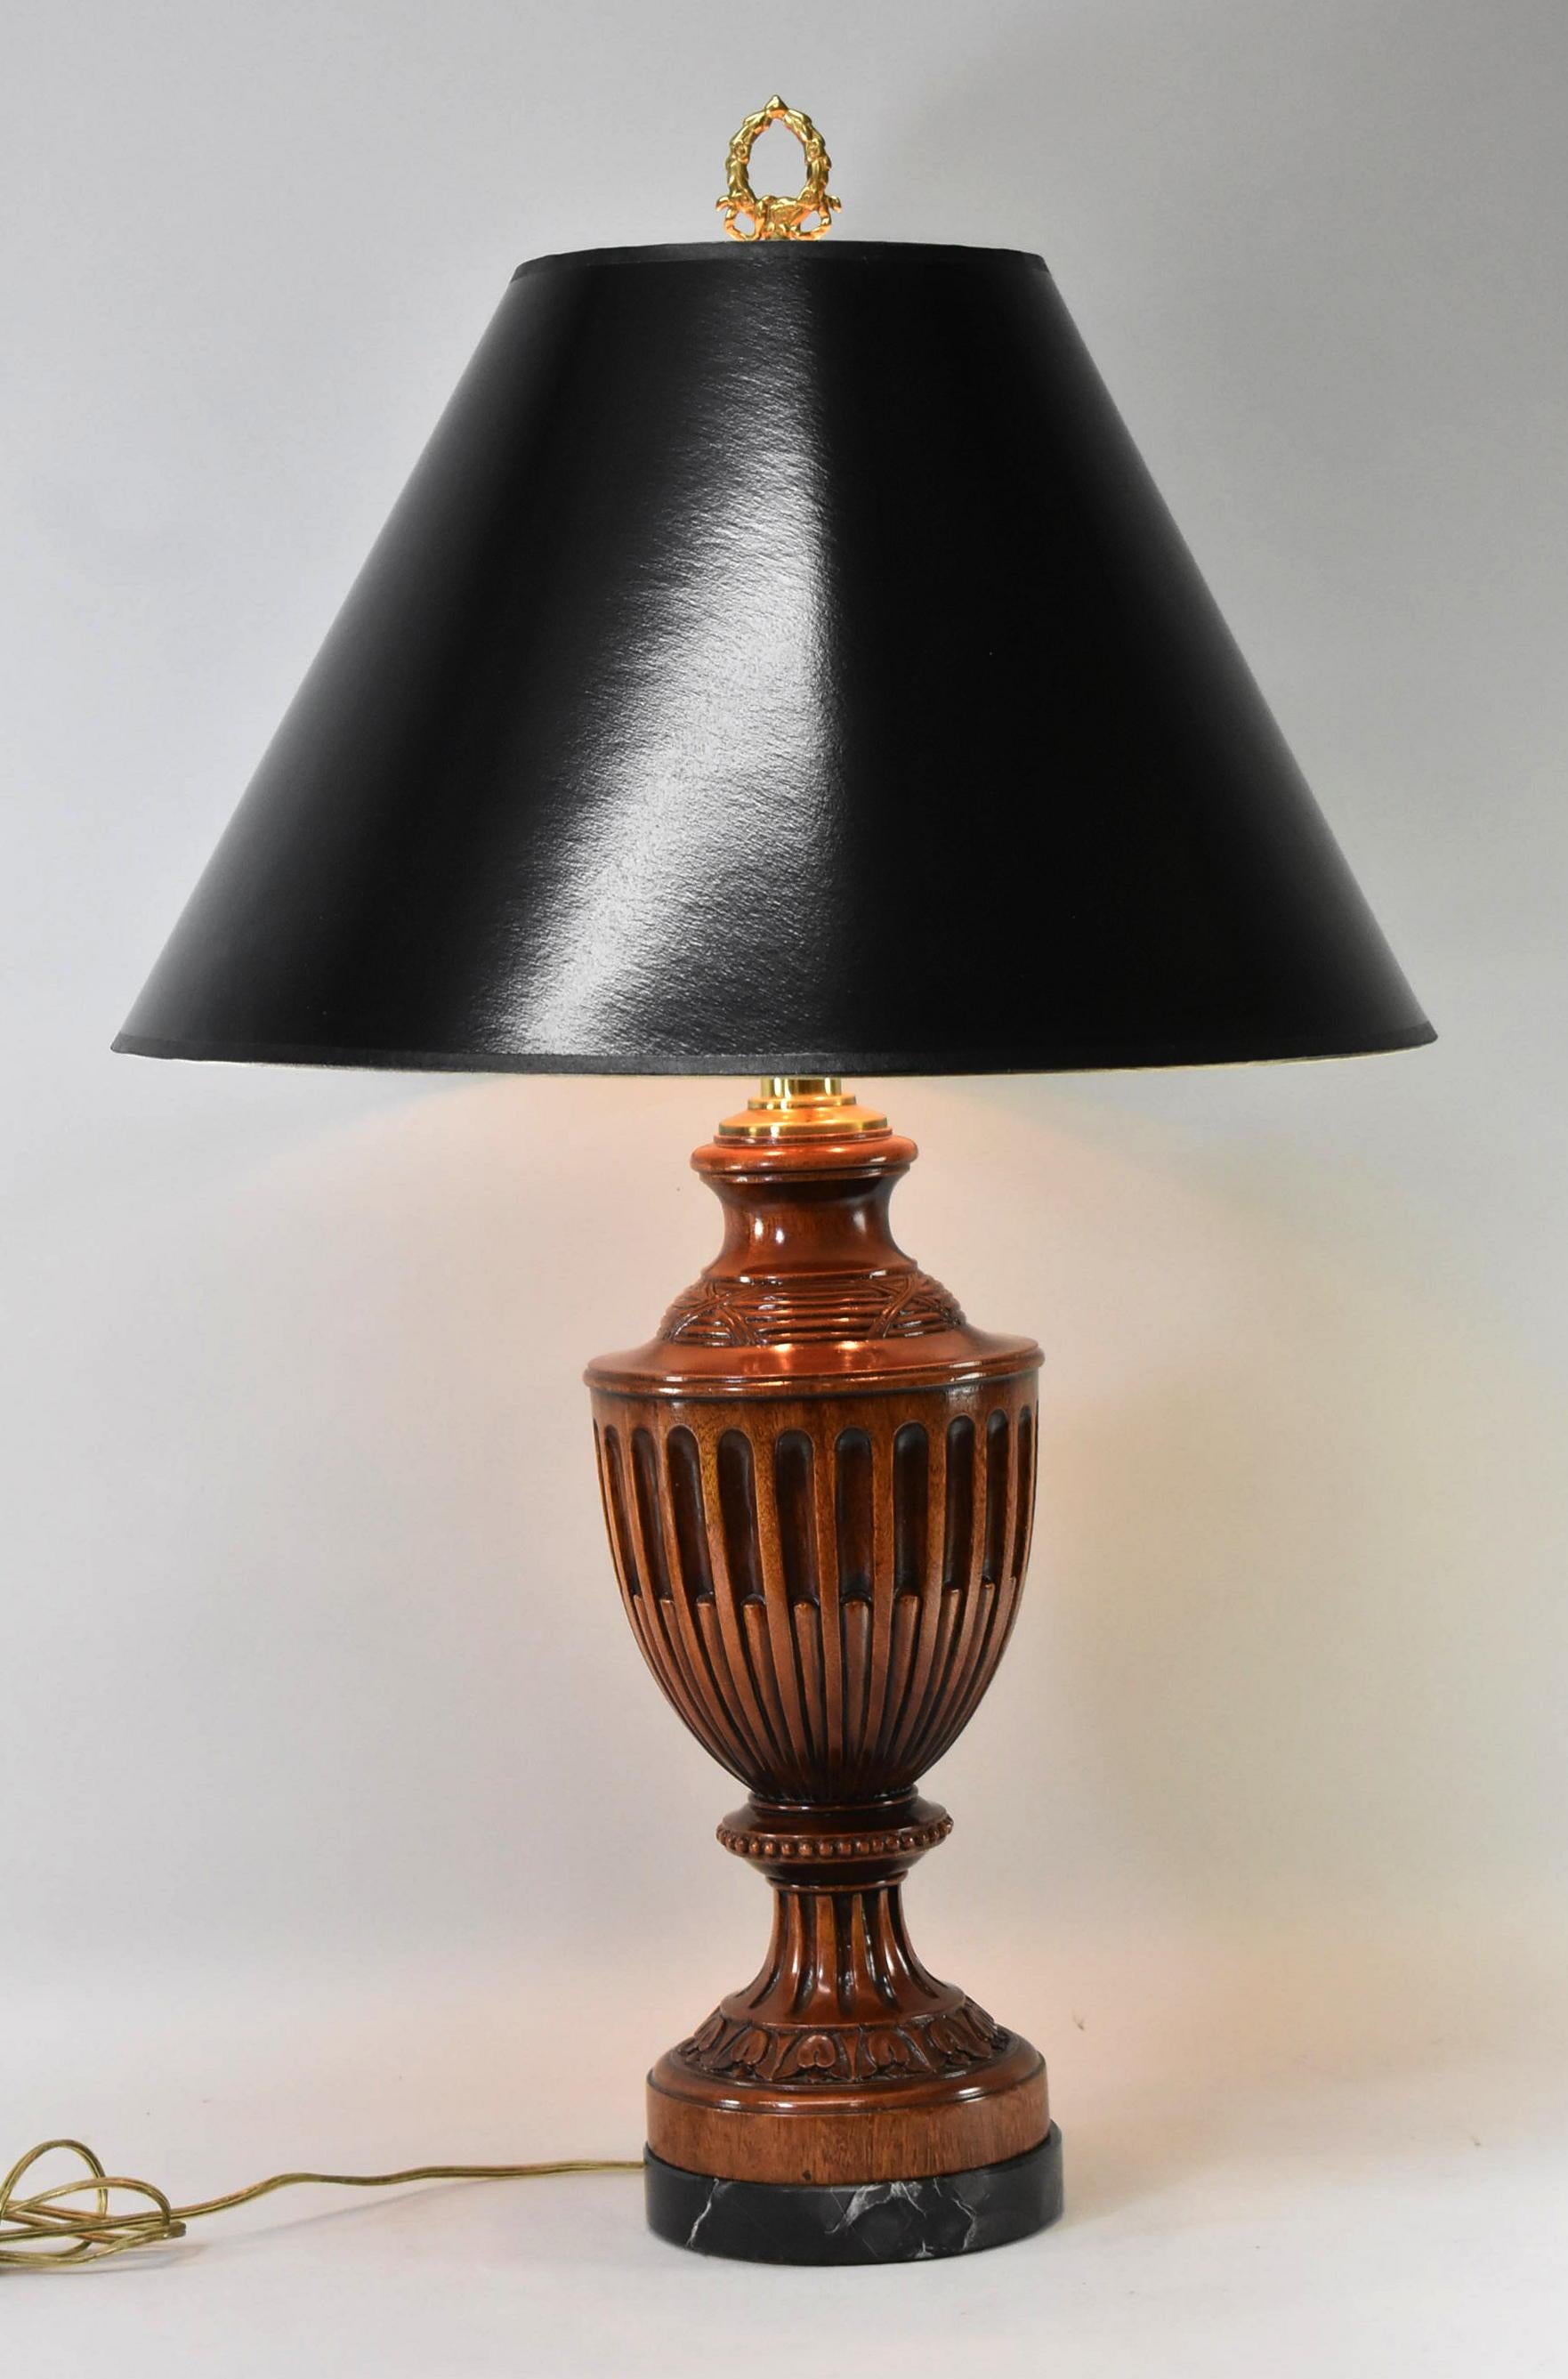 Carved wood urn shape double socket table lamp with marble base. Lampshade not included. 